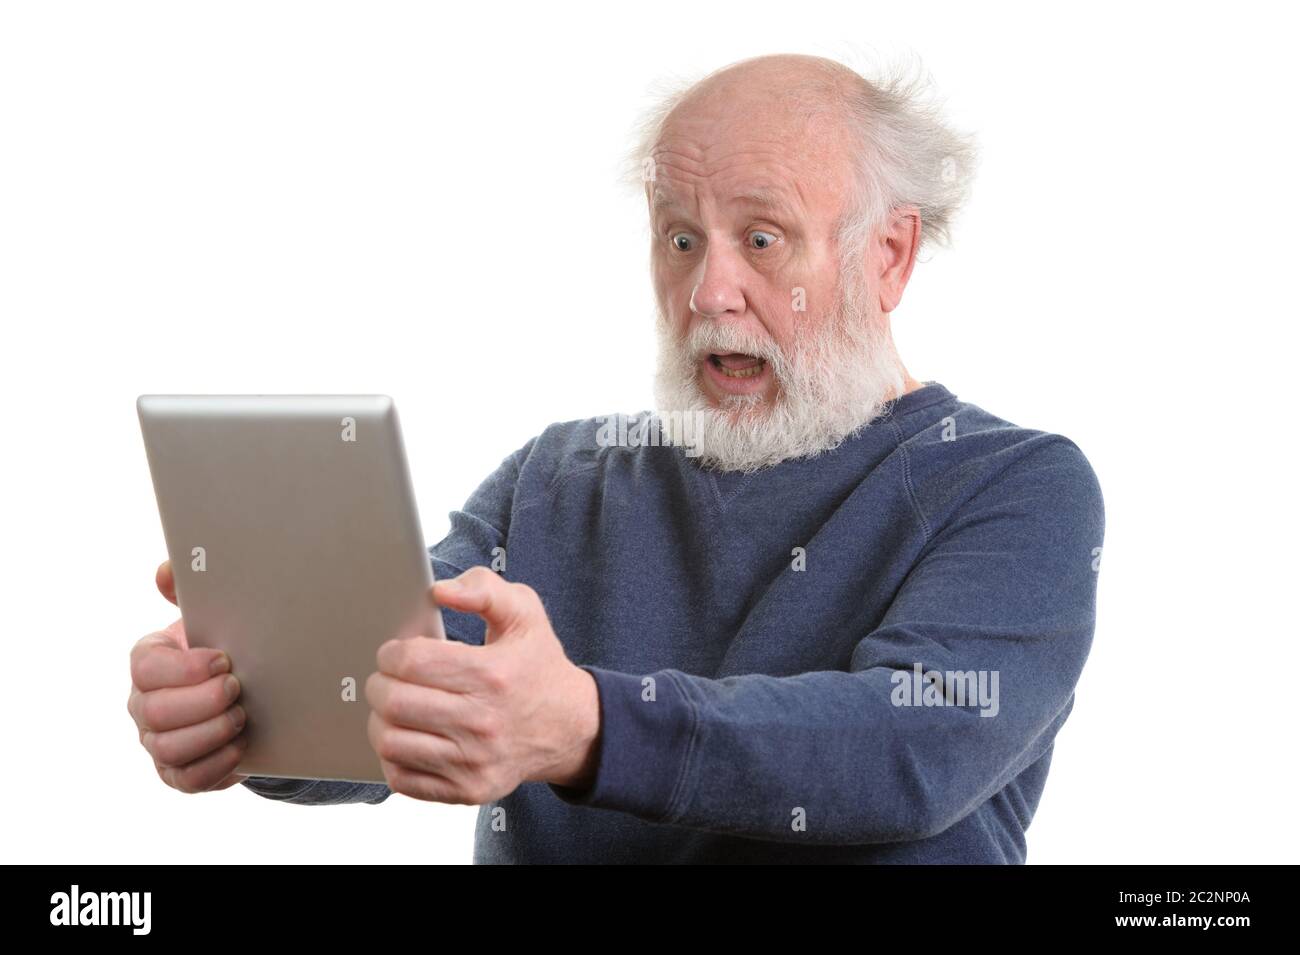 Funny shocked old man using tablet computer isolated on white Stock Photo